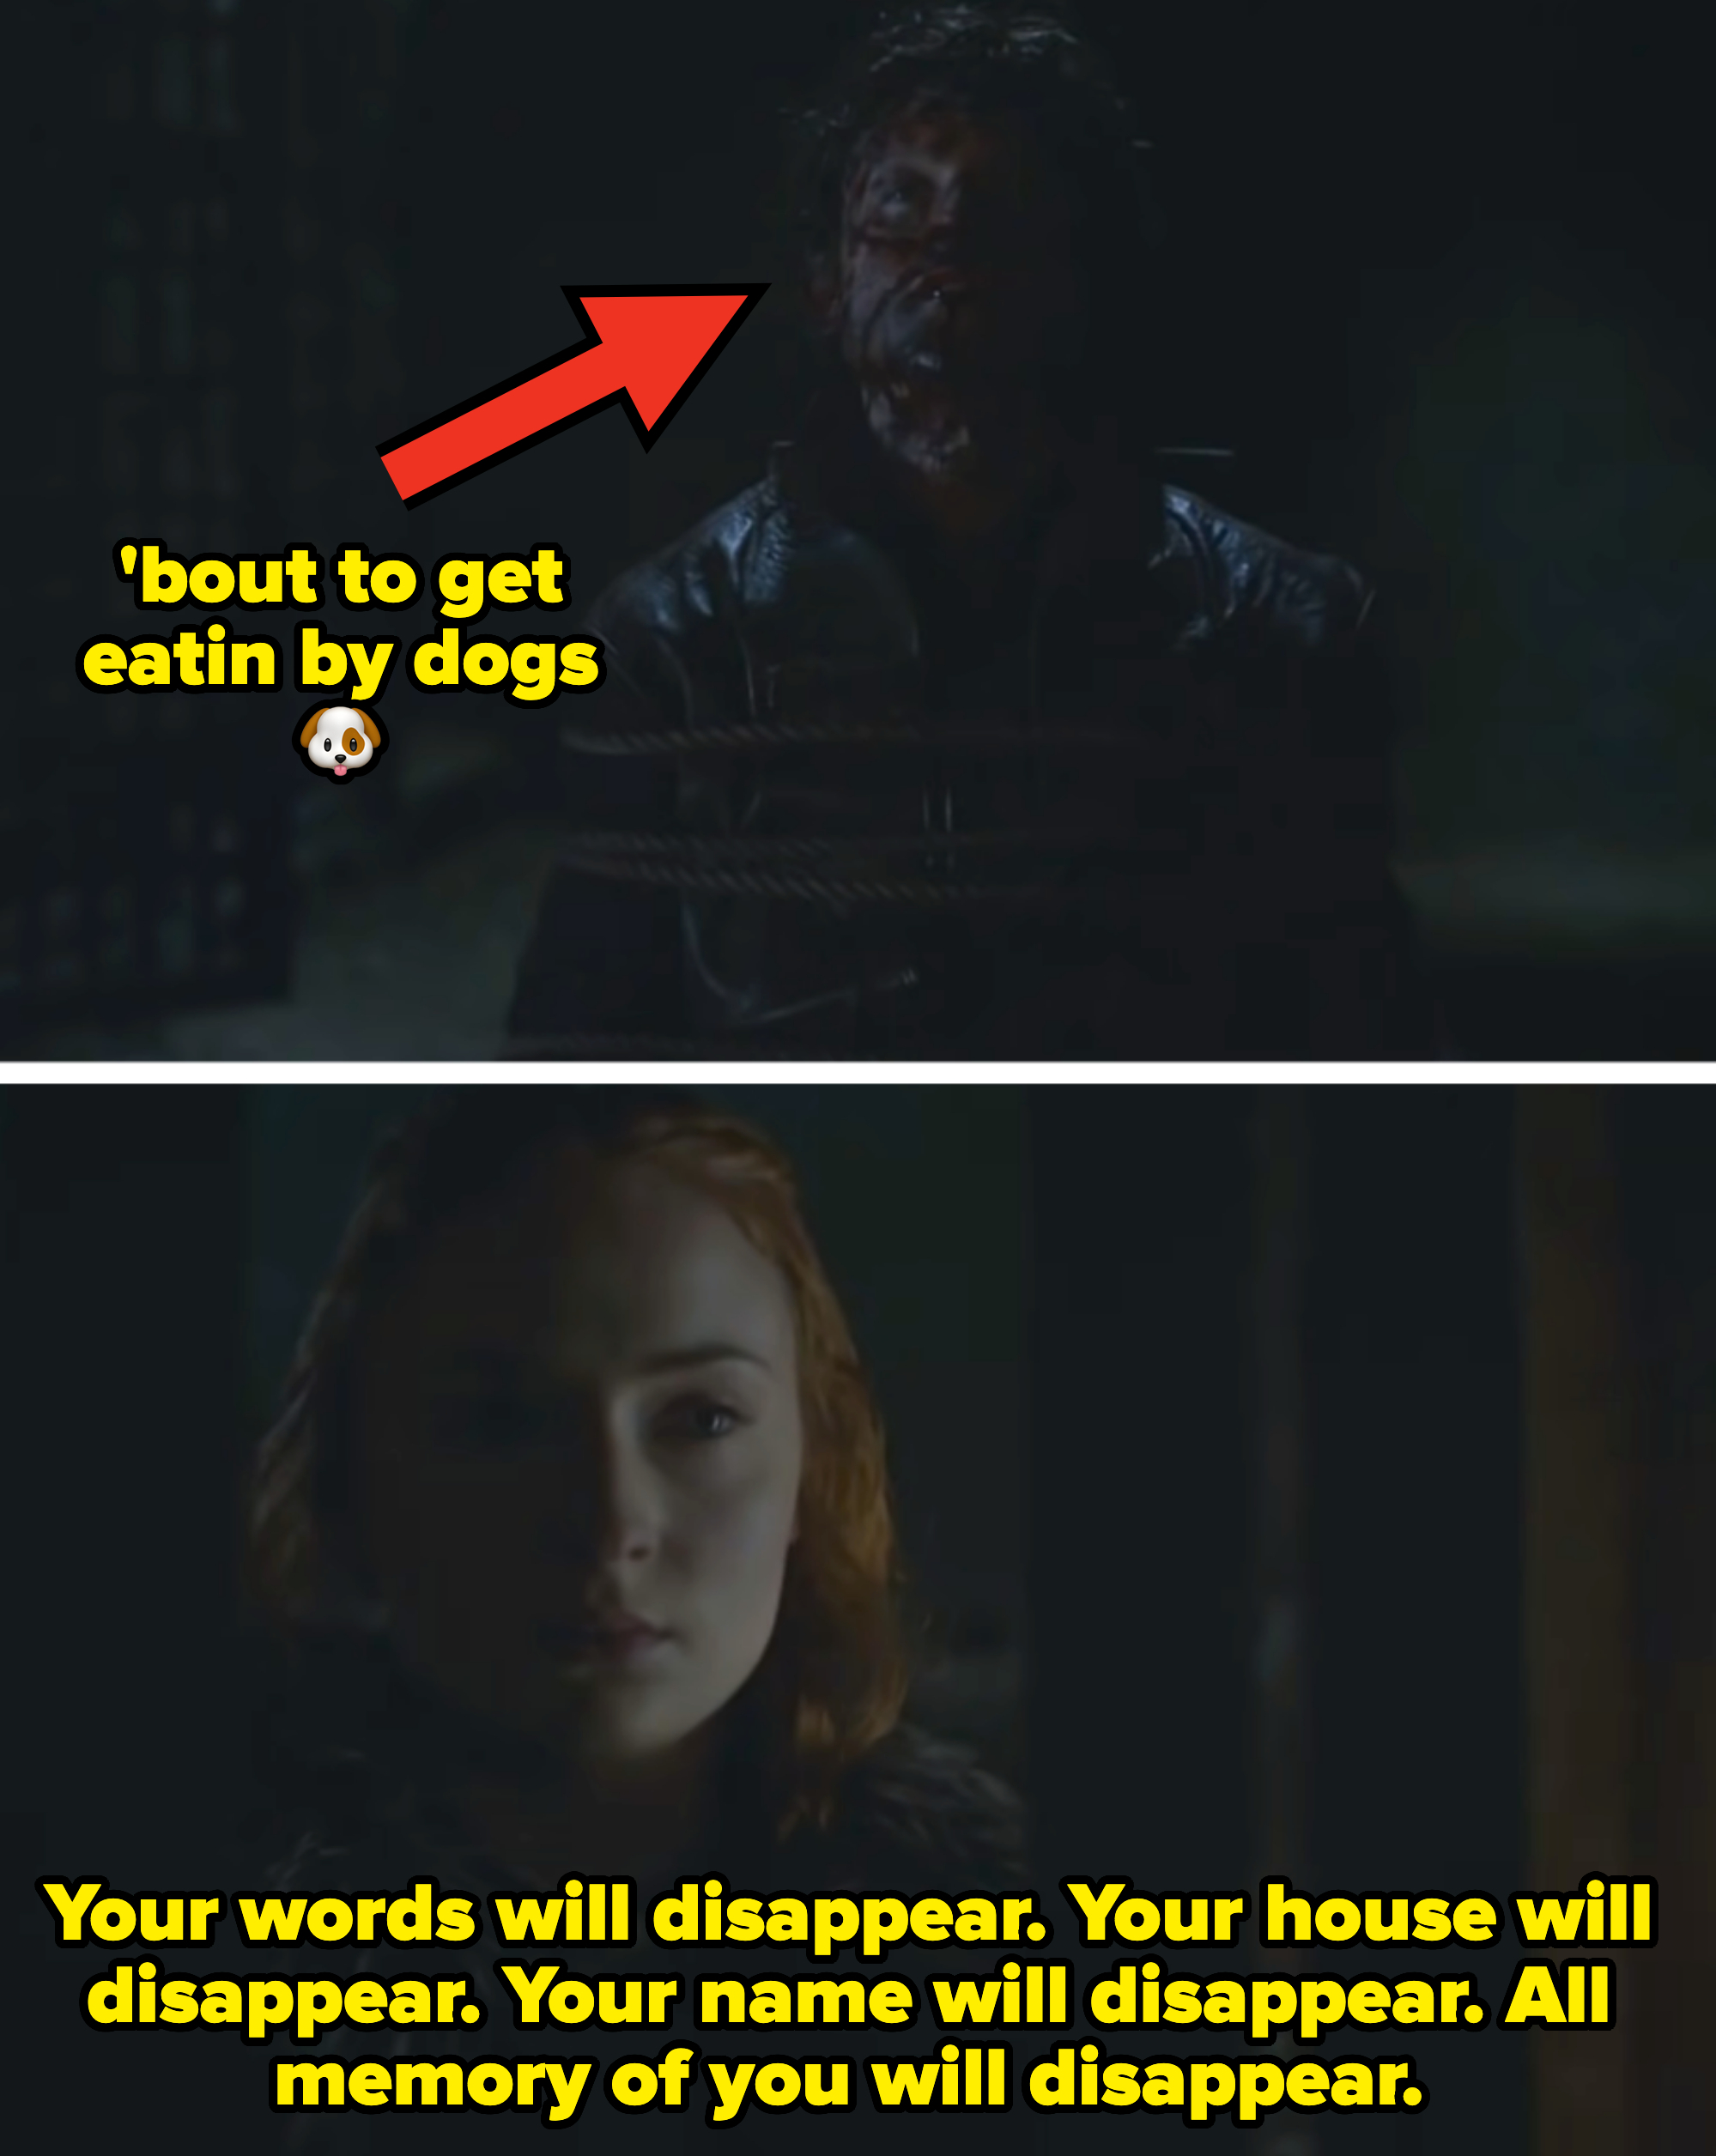 Two characters from the TV show Game of Thrones; one male looking weary in the upper panel, and one female with a solemn expression in the lower panel